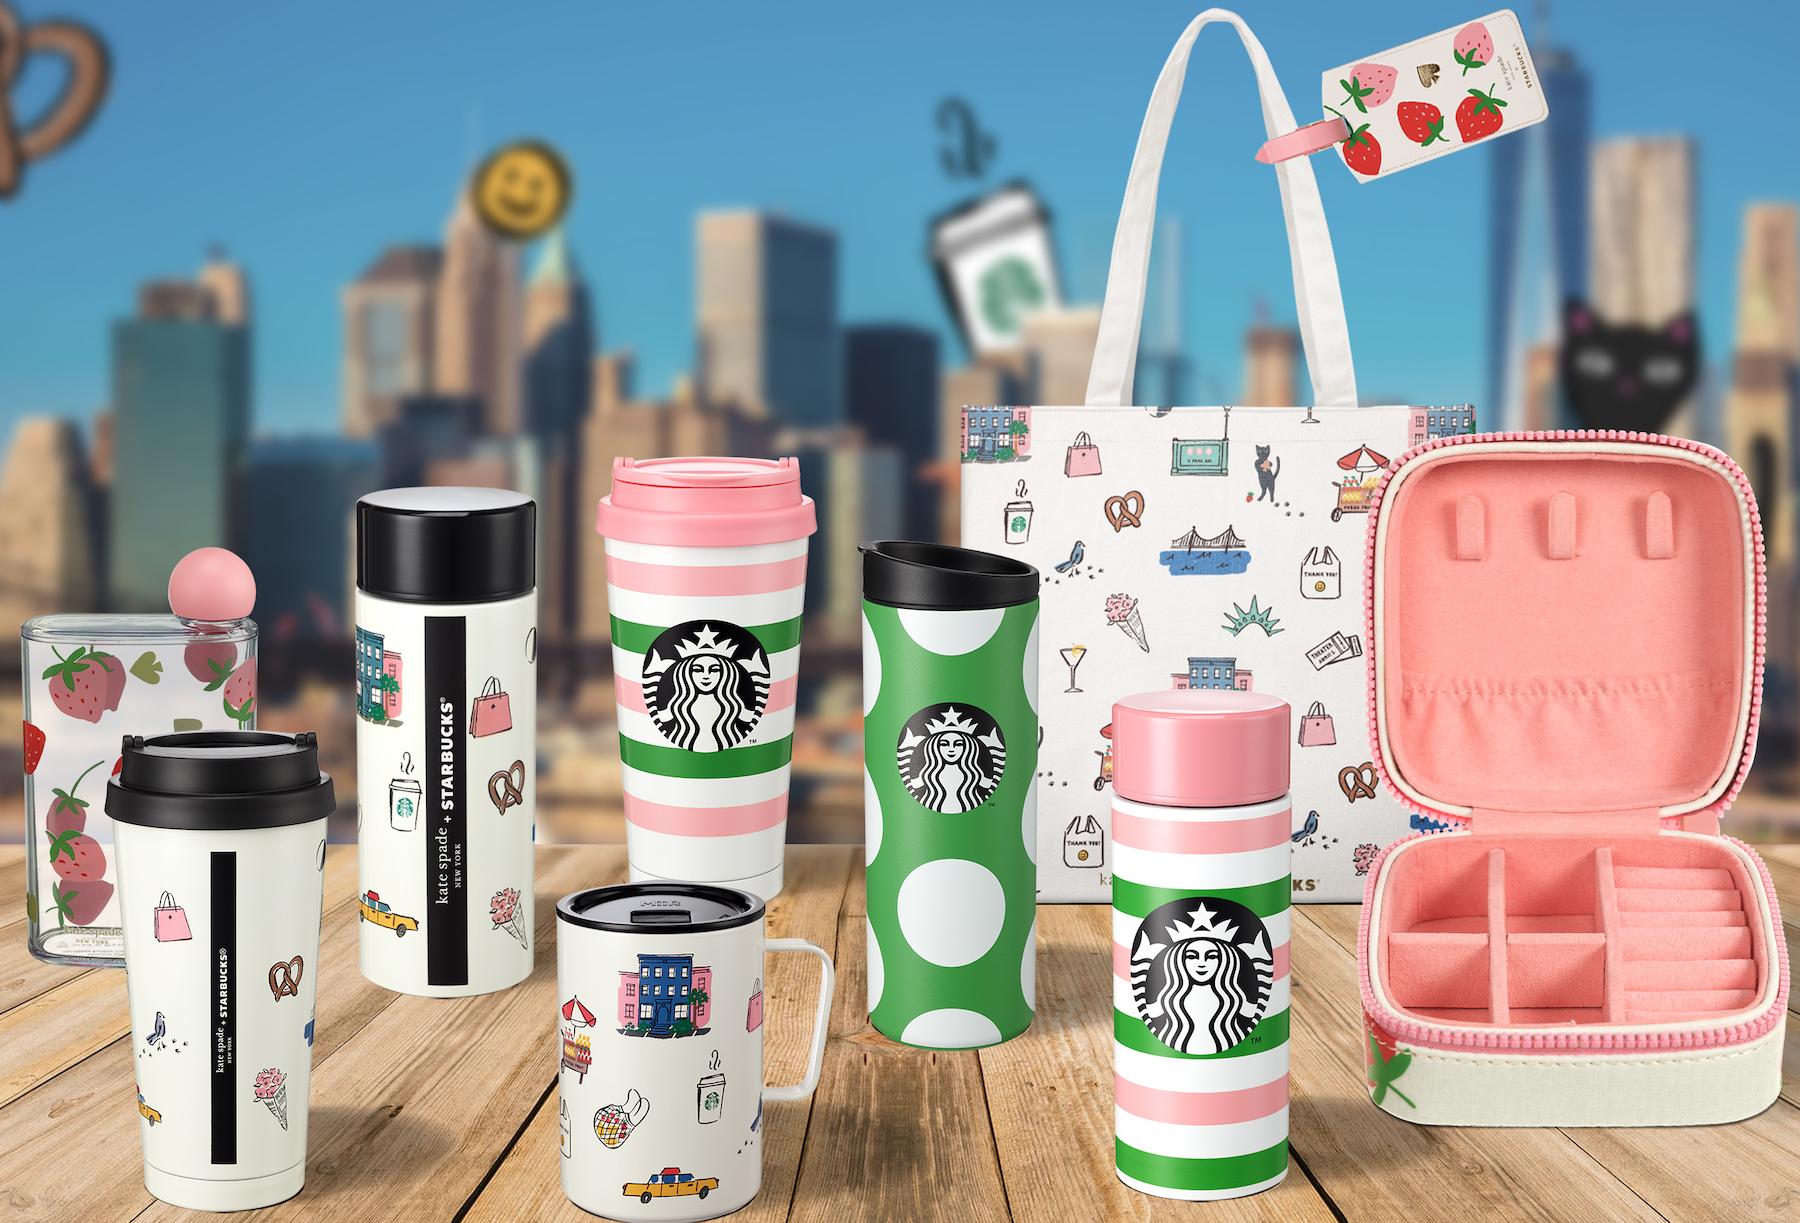 Starbucks releases another collaboration with Kate Spade | GMA News Online